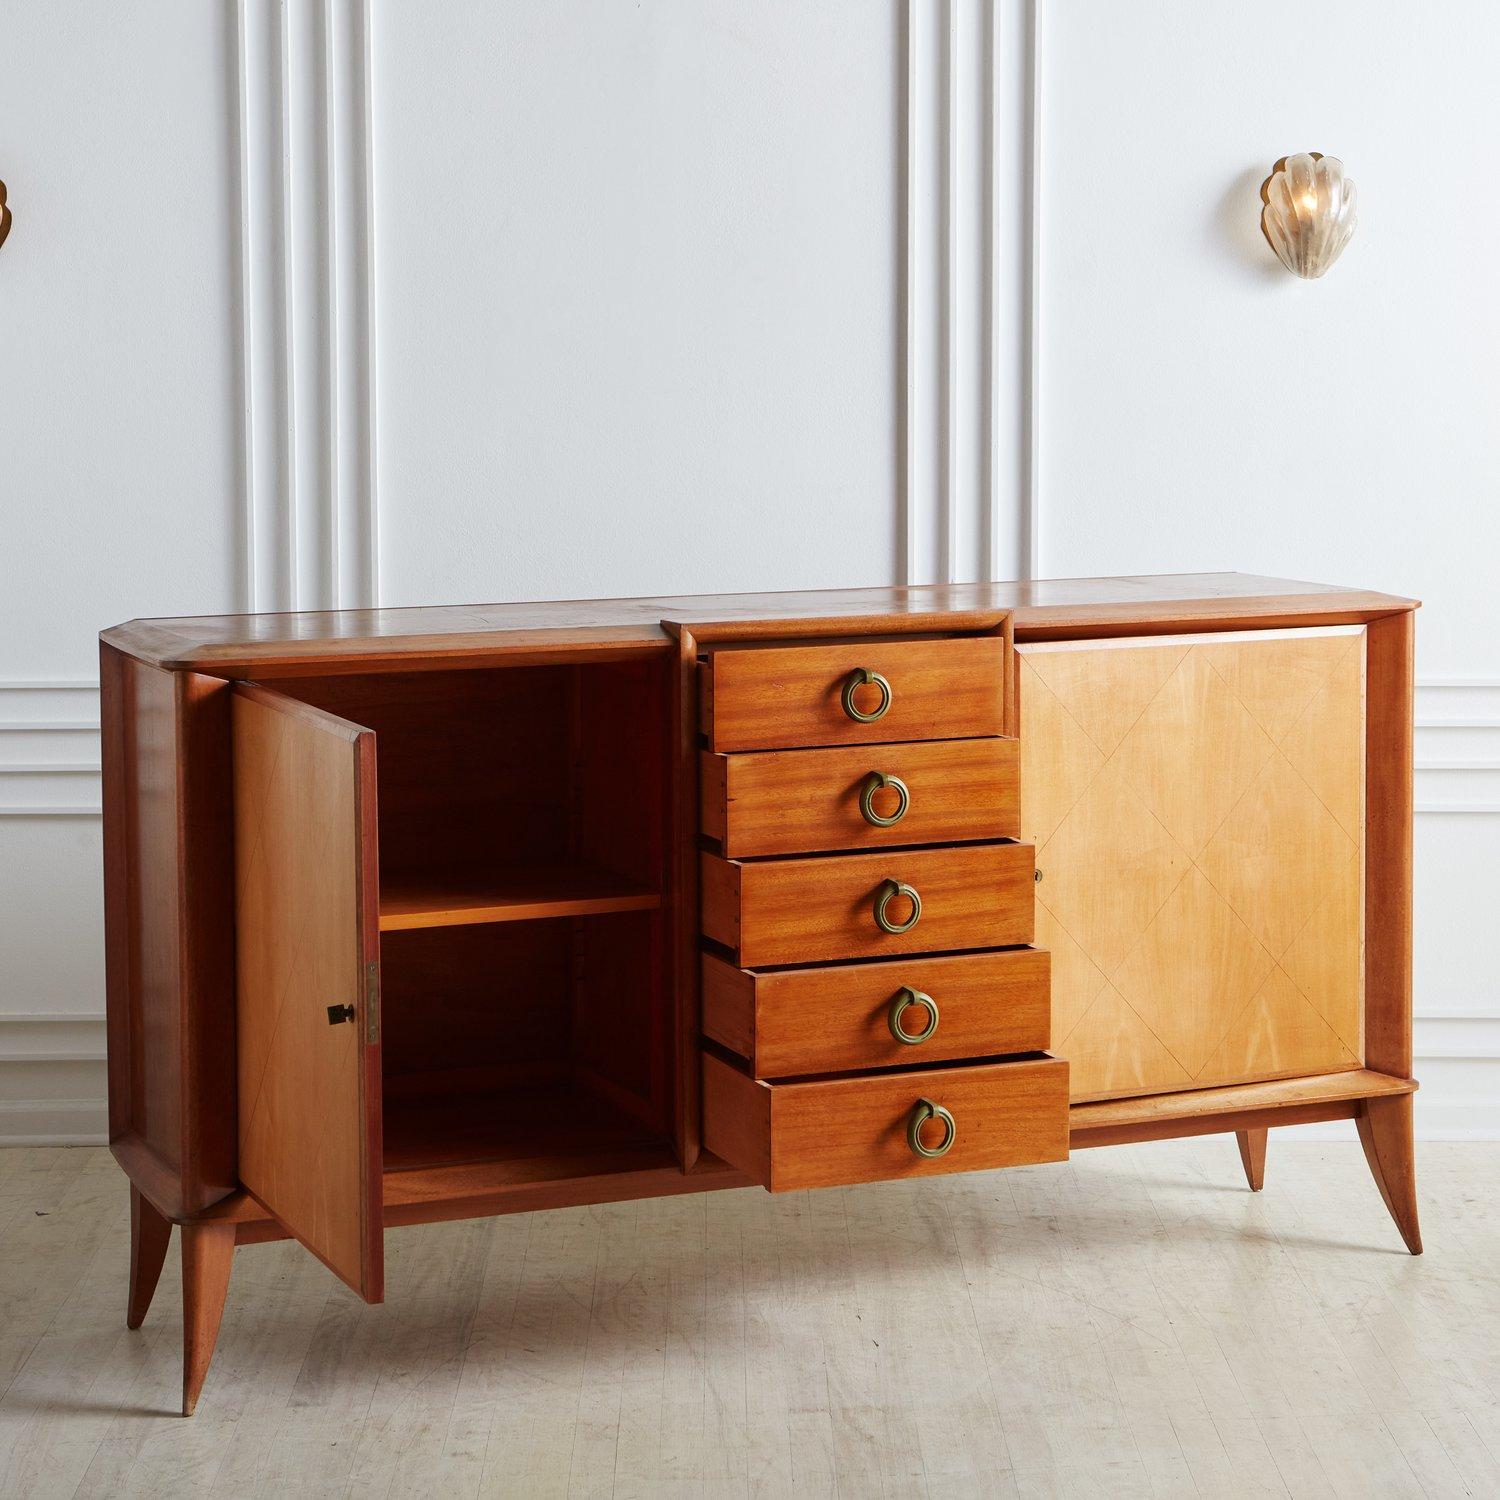 Mid-Century Modern Bleached Mahogany Credenza With Cherry Wood Drawers, France 20th Century For Sale